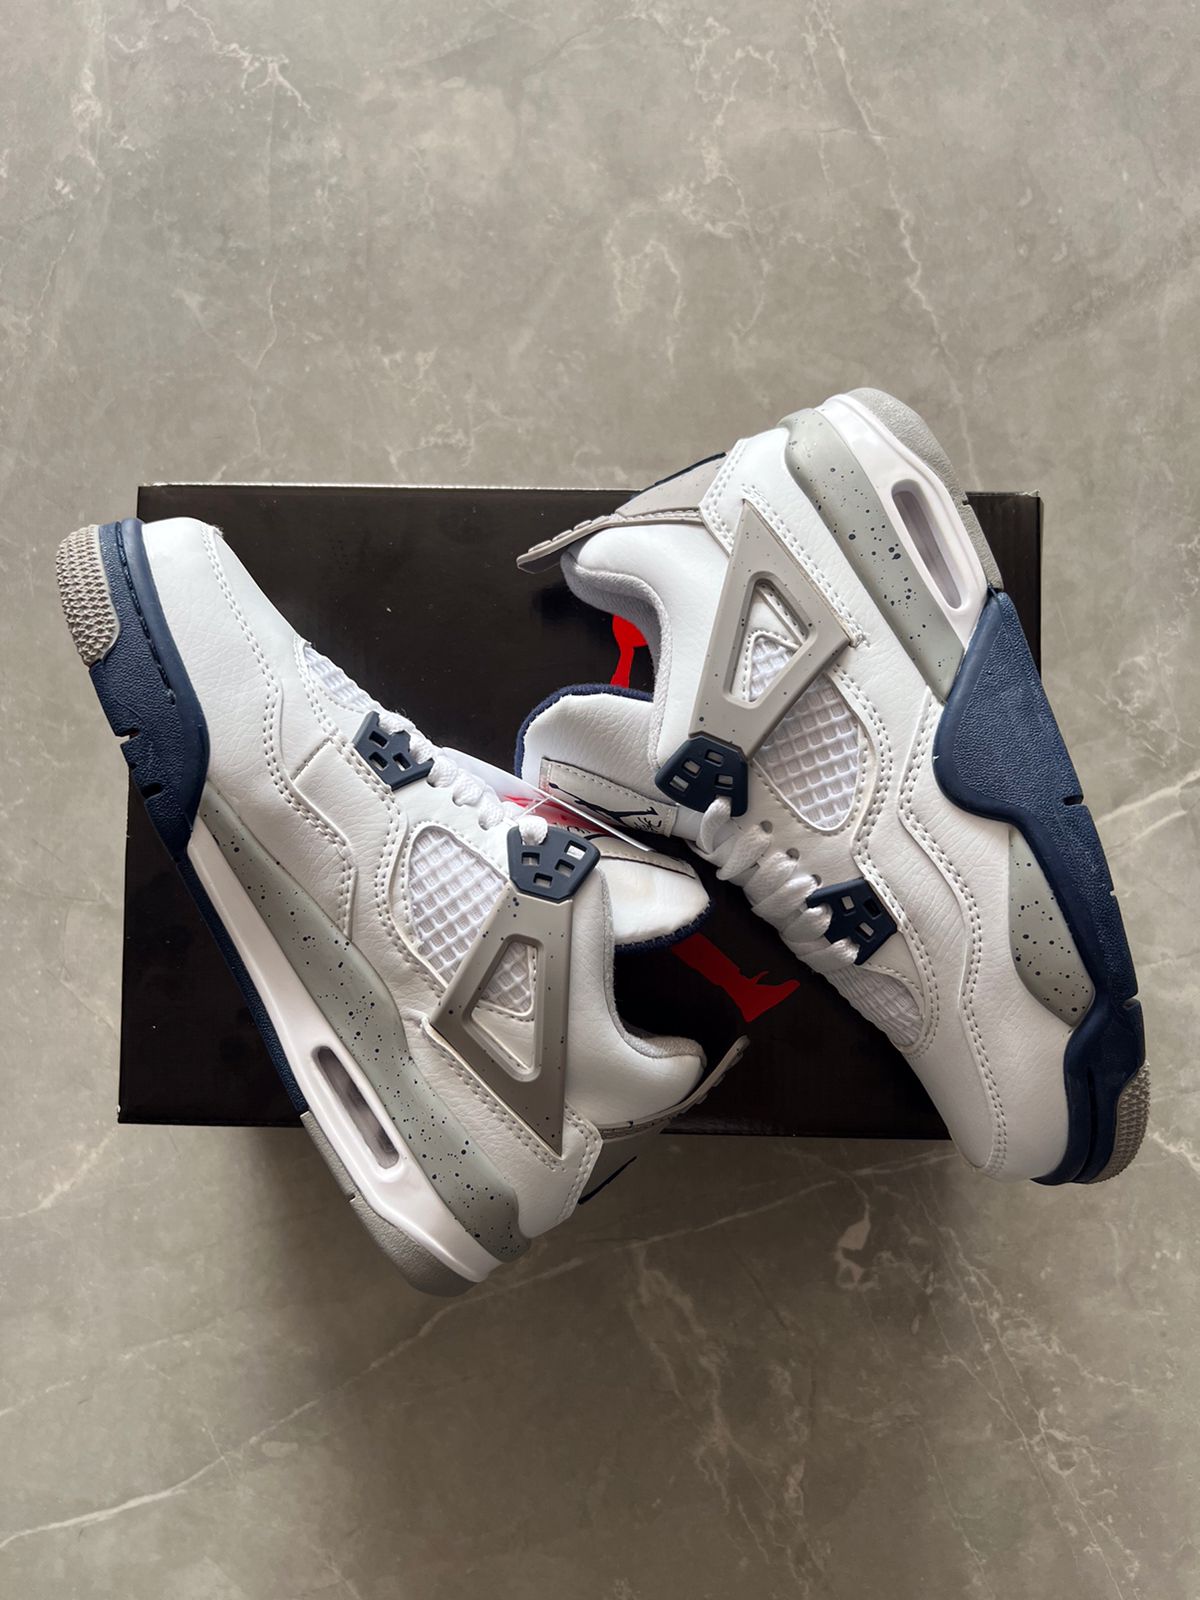 Retro 4 Mid Cut Shoes In Stock